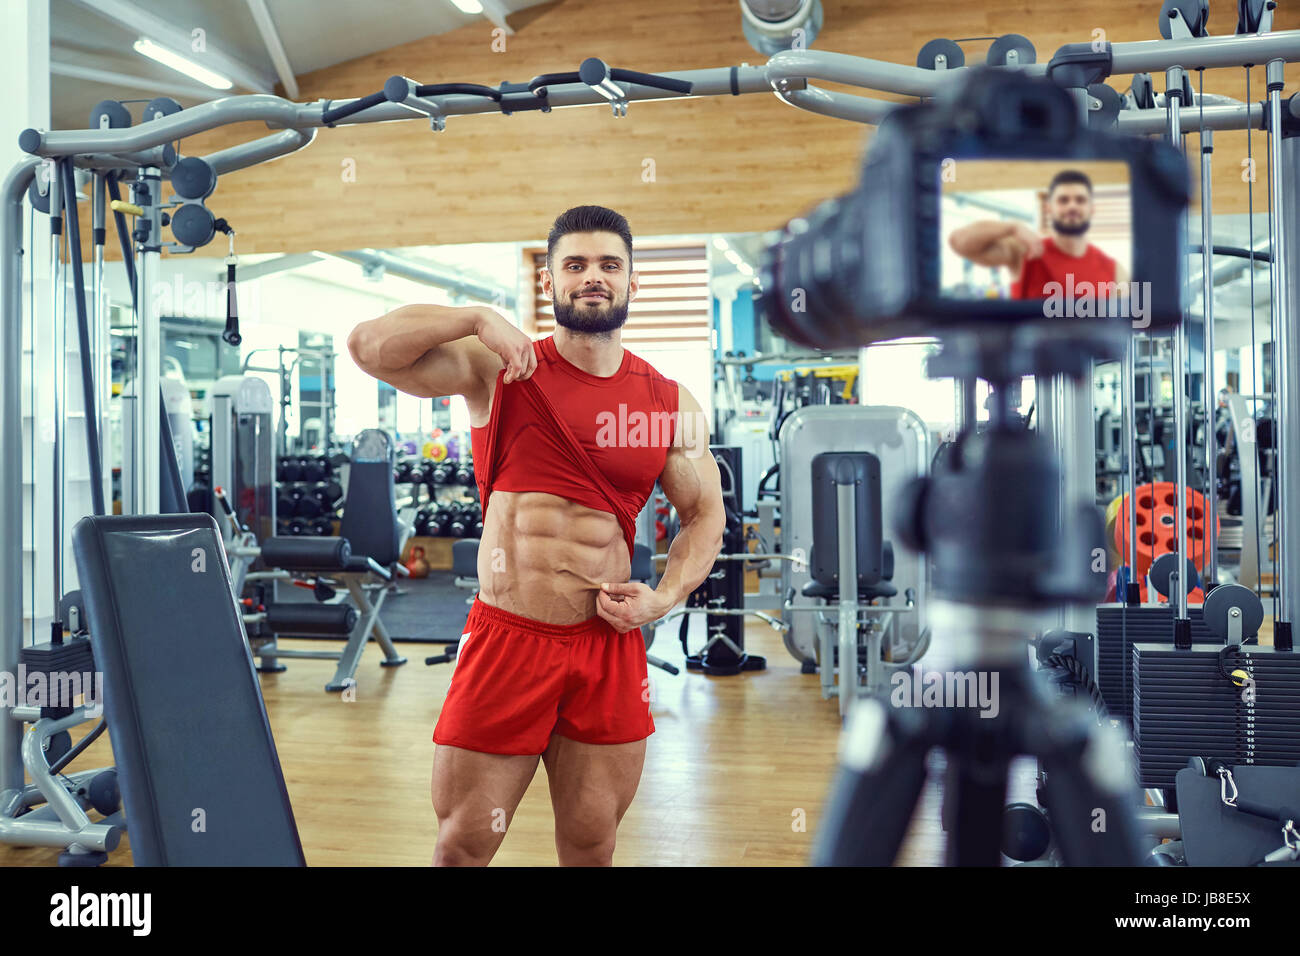 Vlogger athlete bodybuilder makes a video in the gym Stock Photo